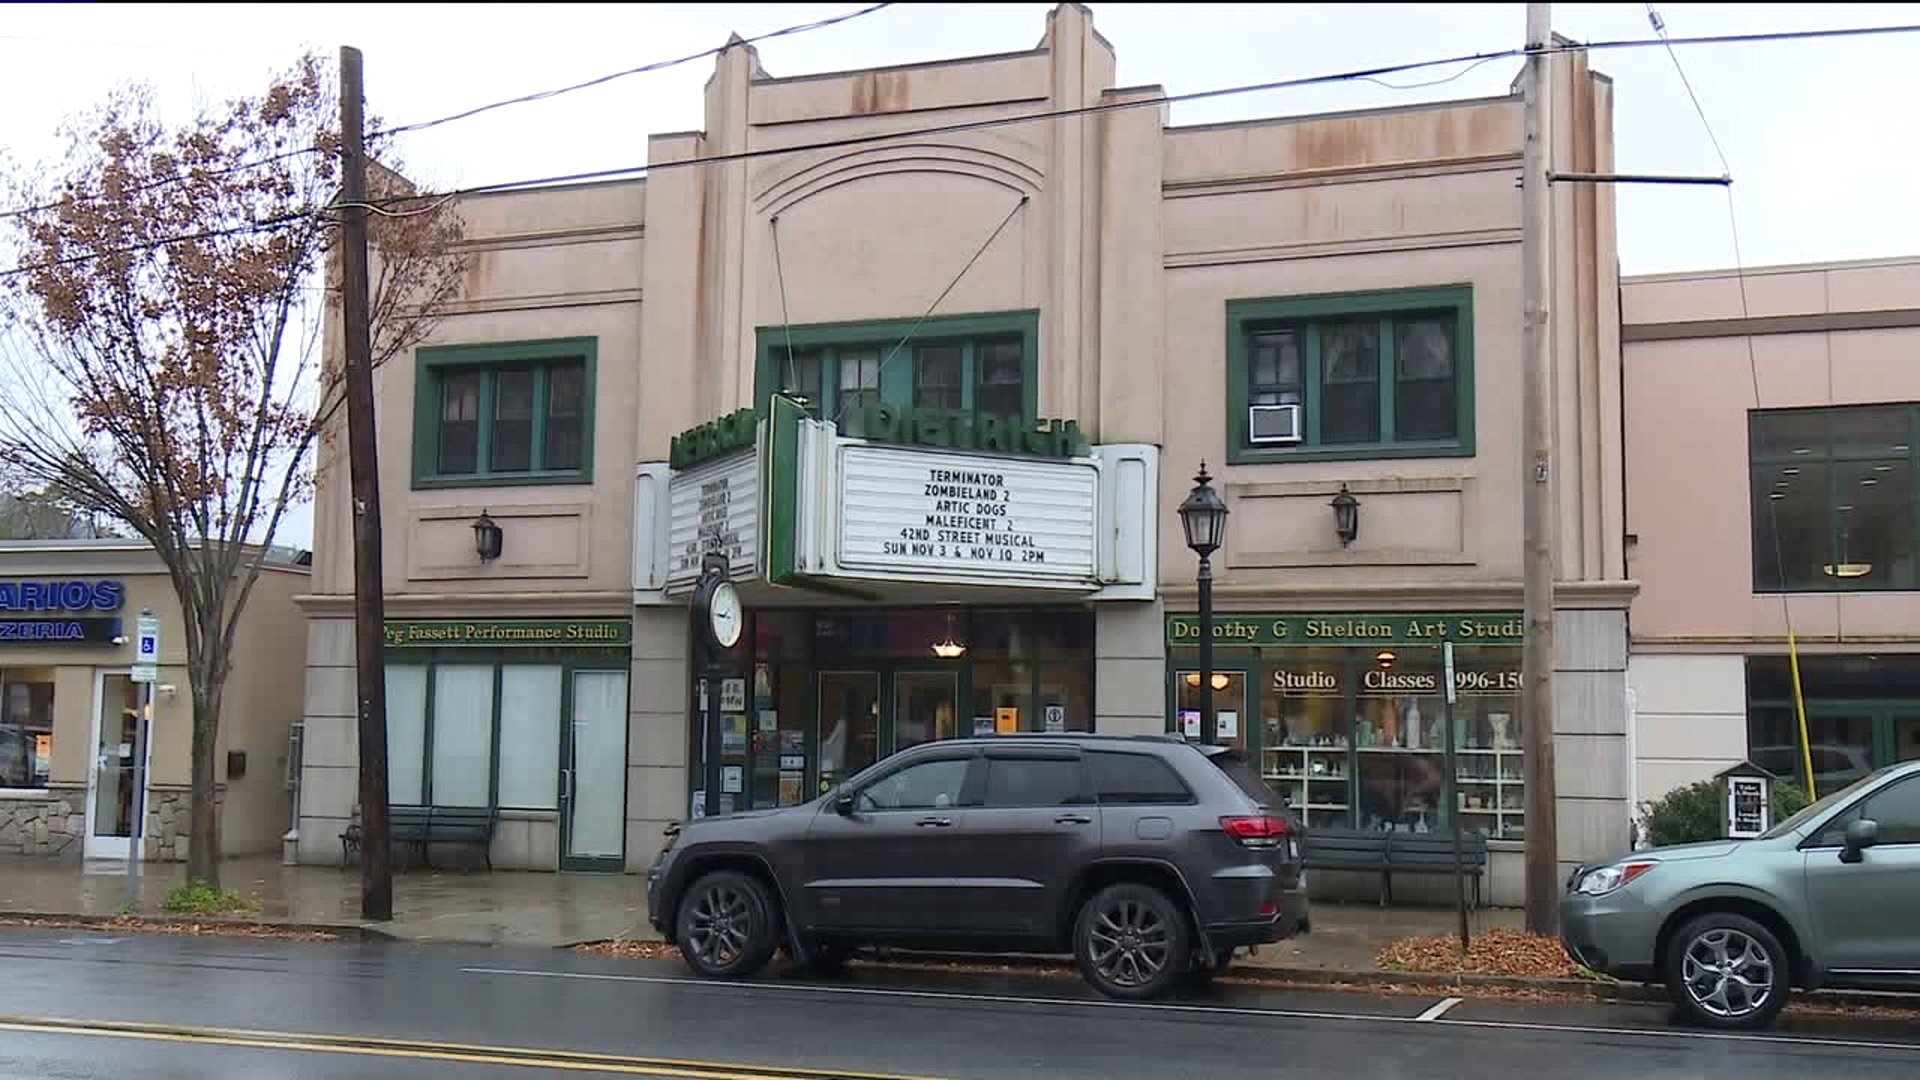 Plan to Spruce Up Facades Along Route 6